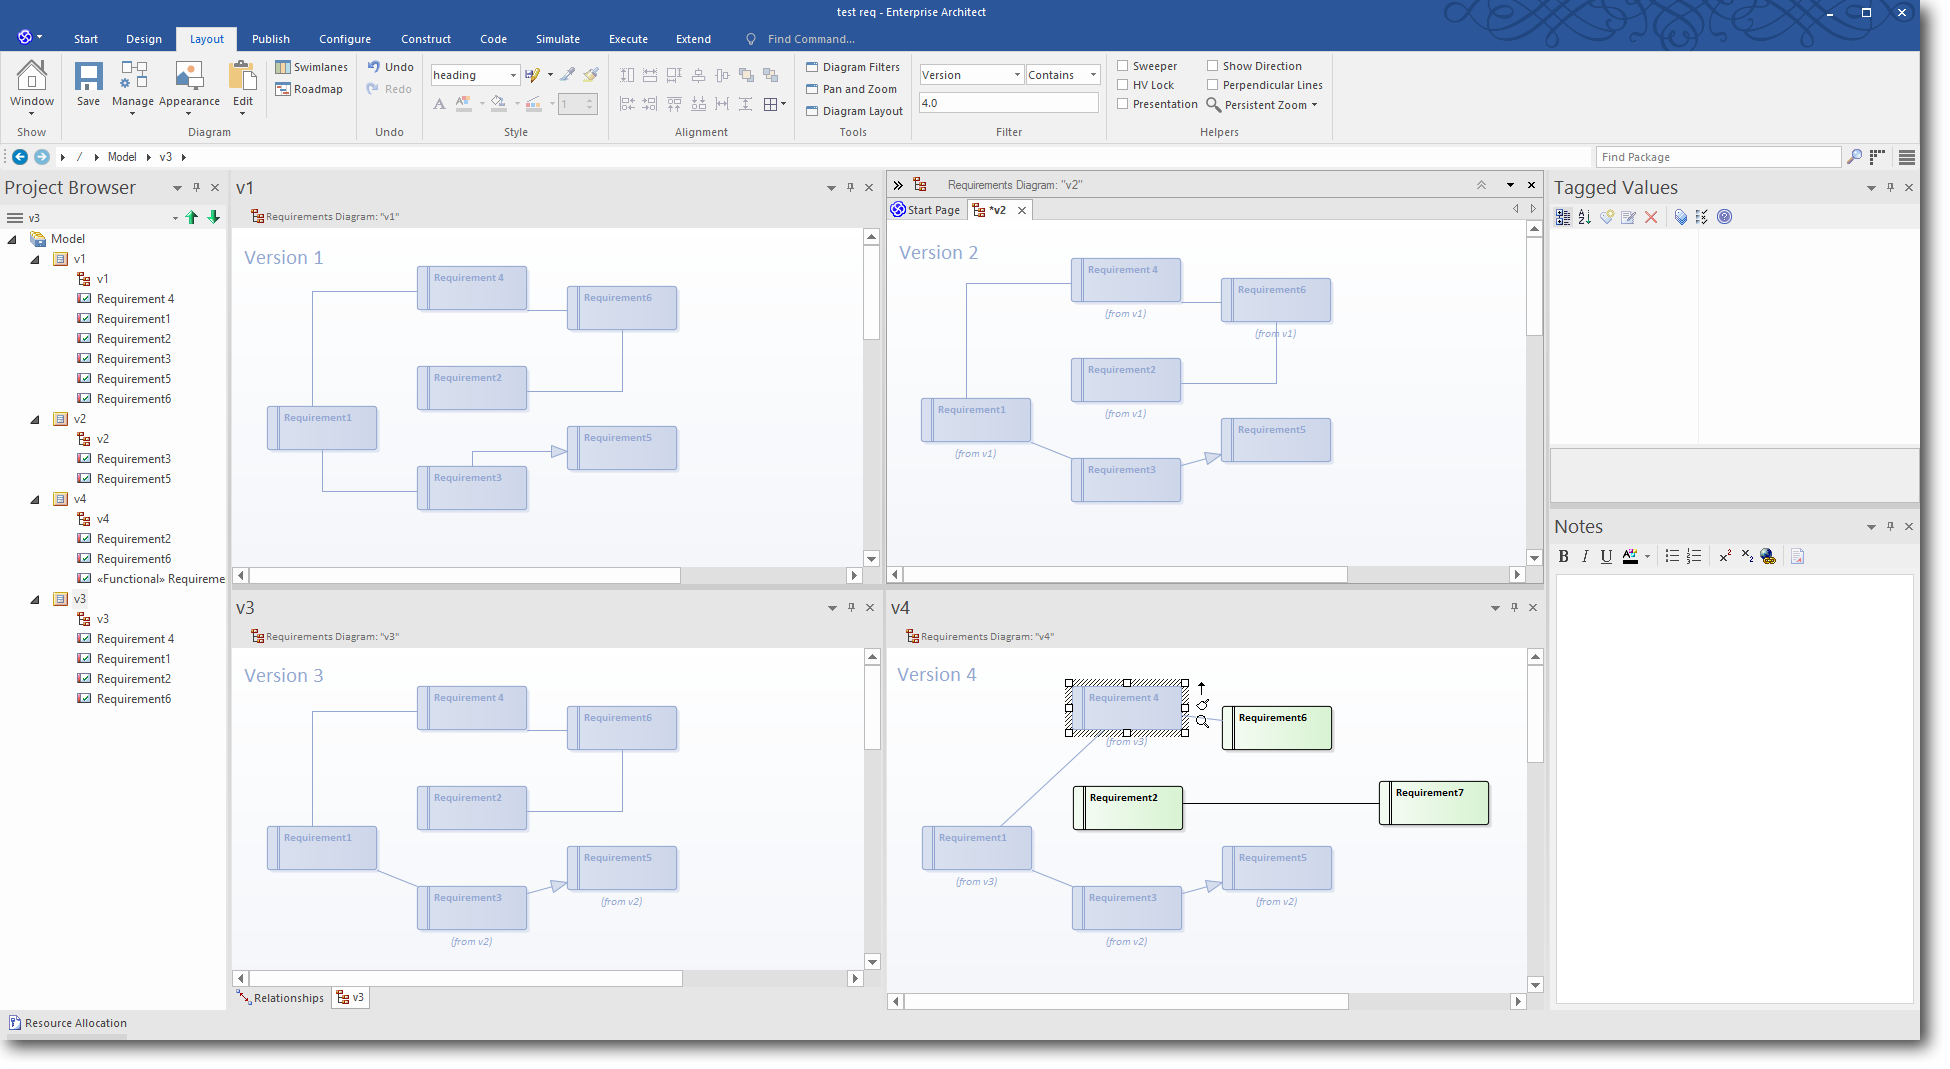 Enterprise Architect 13: Time Aware Modeling - Using a Diagram Filter to highlight Version 4.0 elements